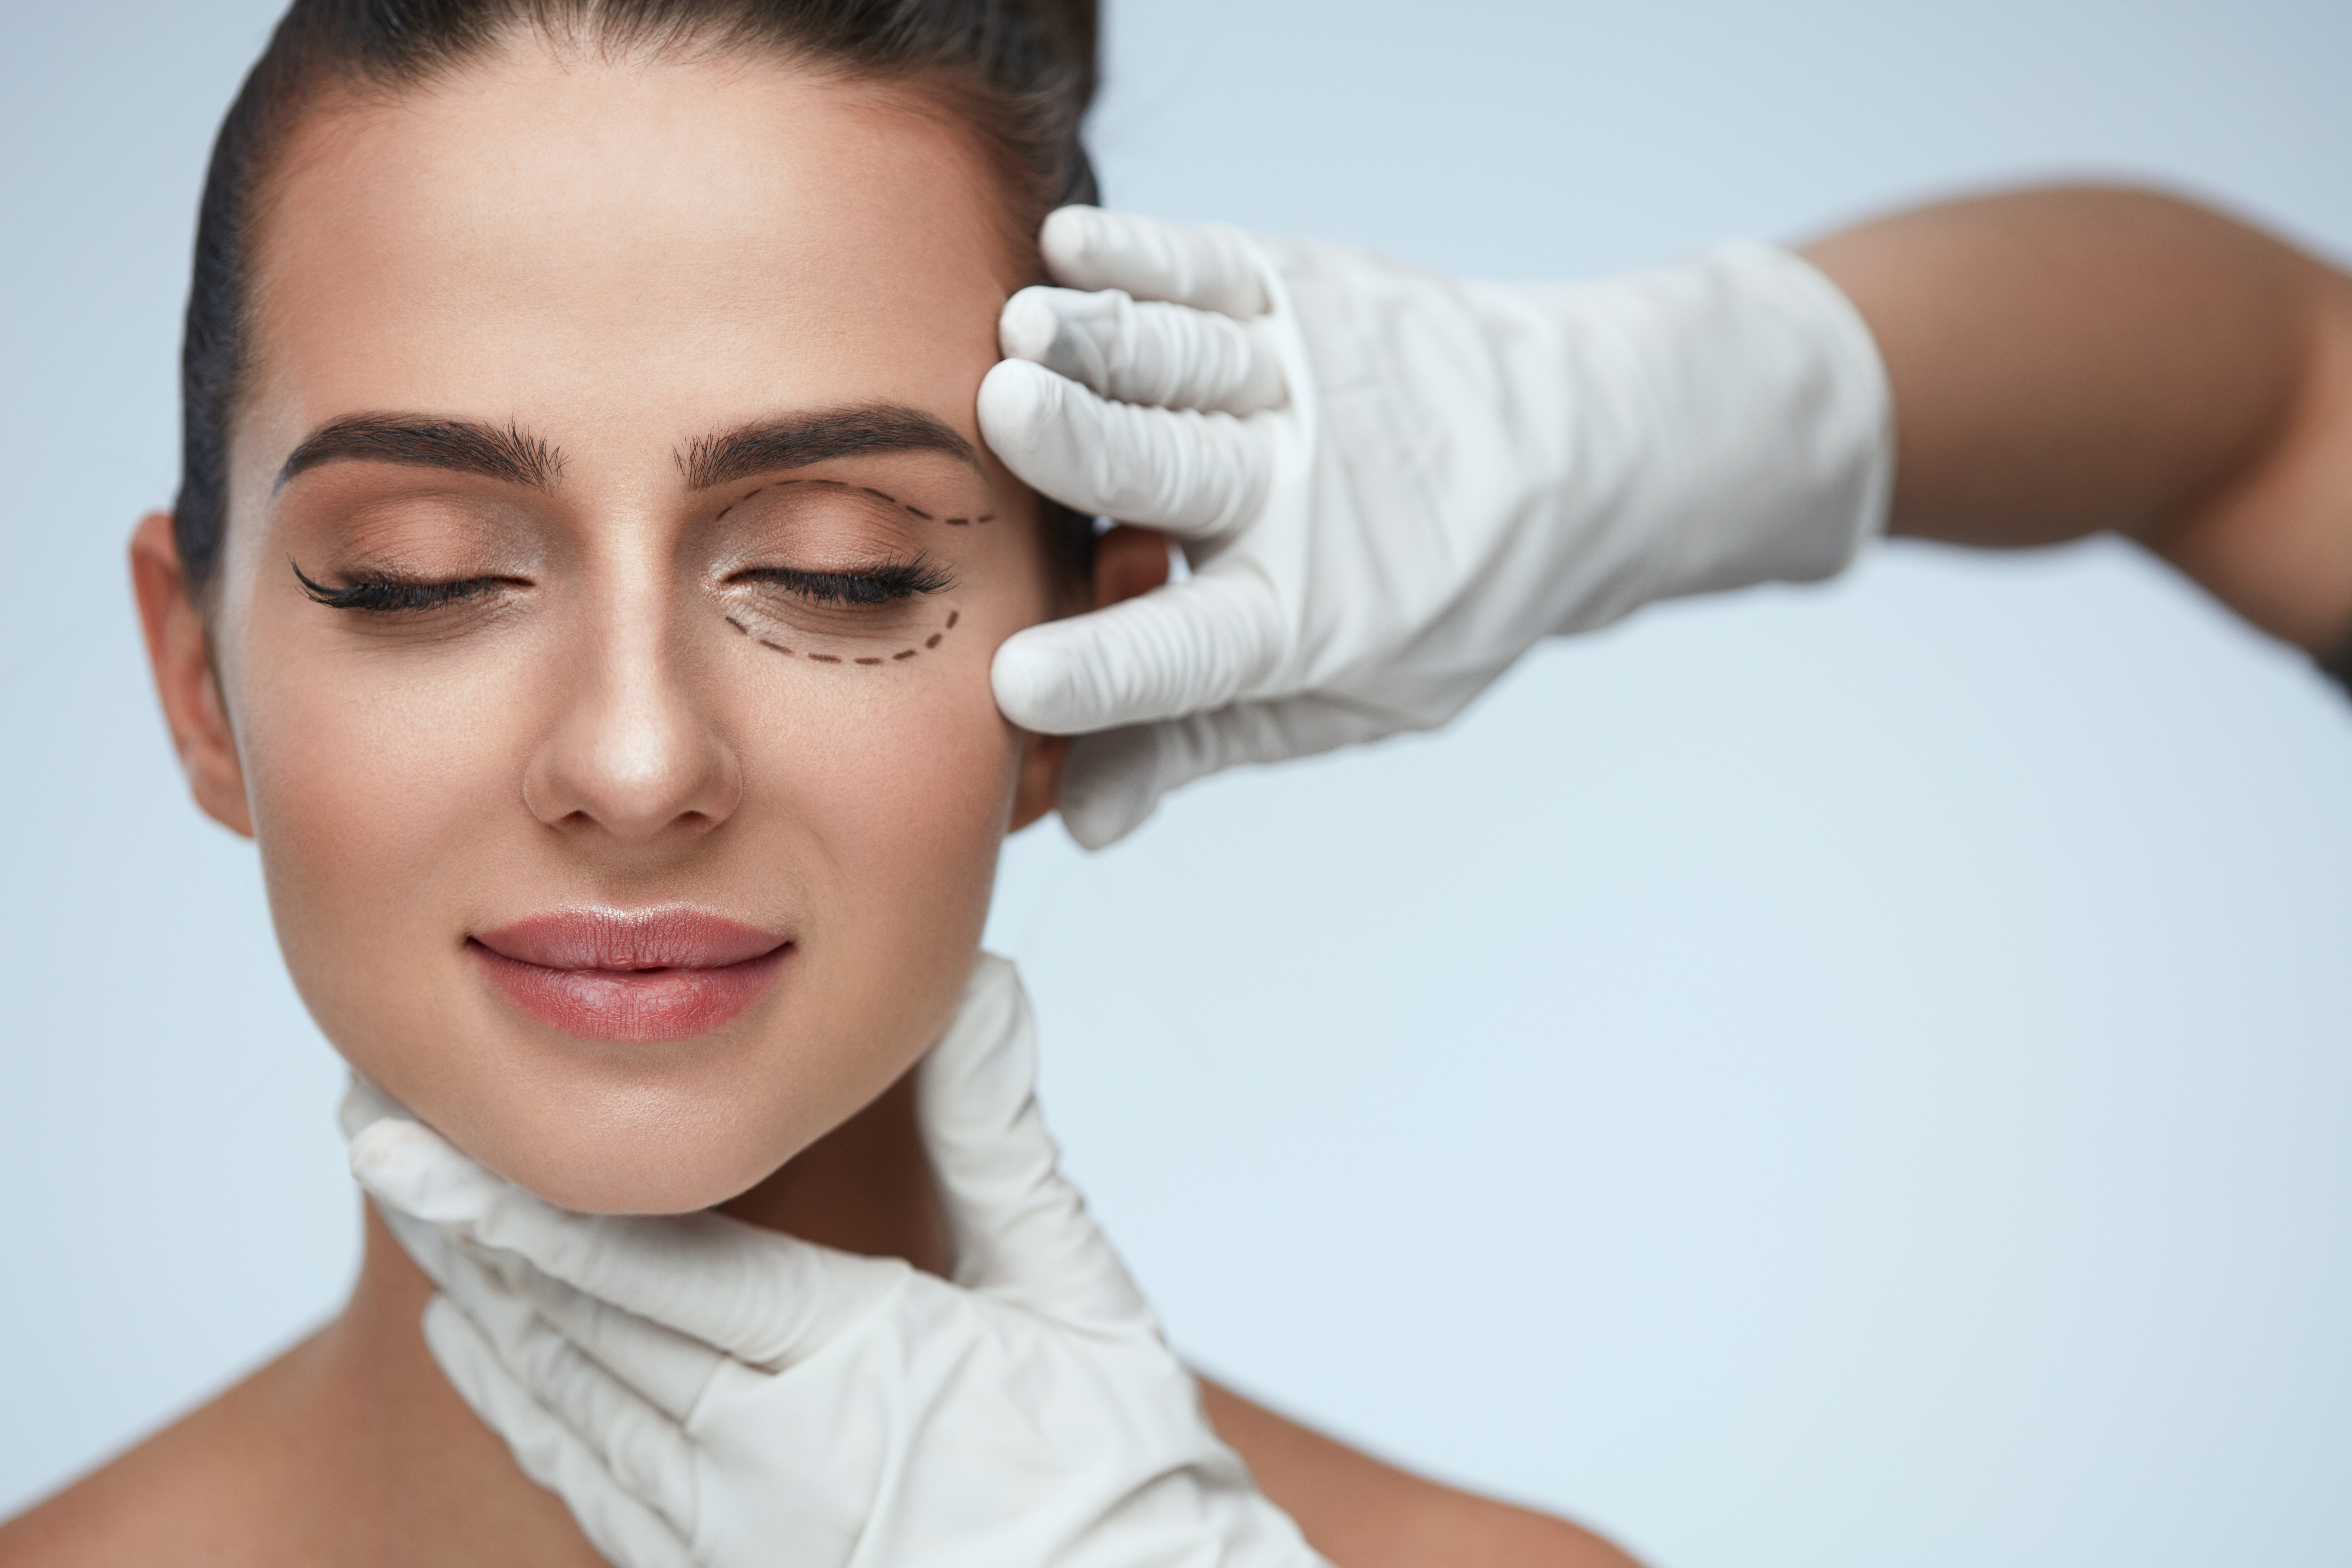 Eyelid Surgery Recovery: What to Expect